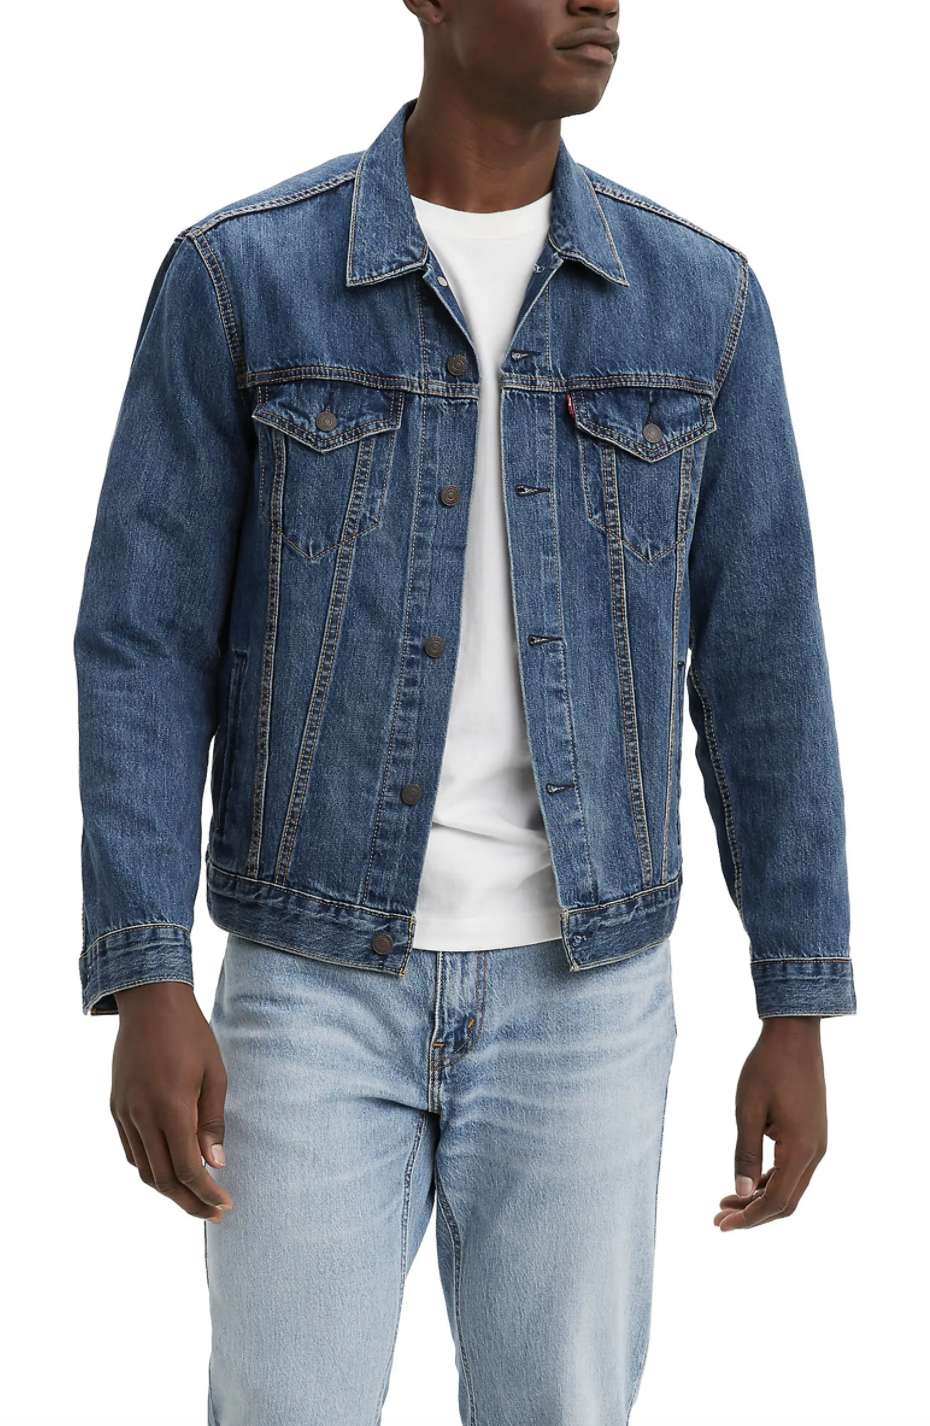 Buy Jeans Jacket For Boys Online In India At Best Prices | Tata CLiQ